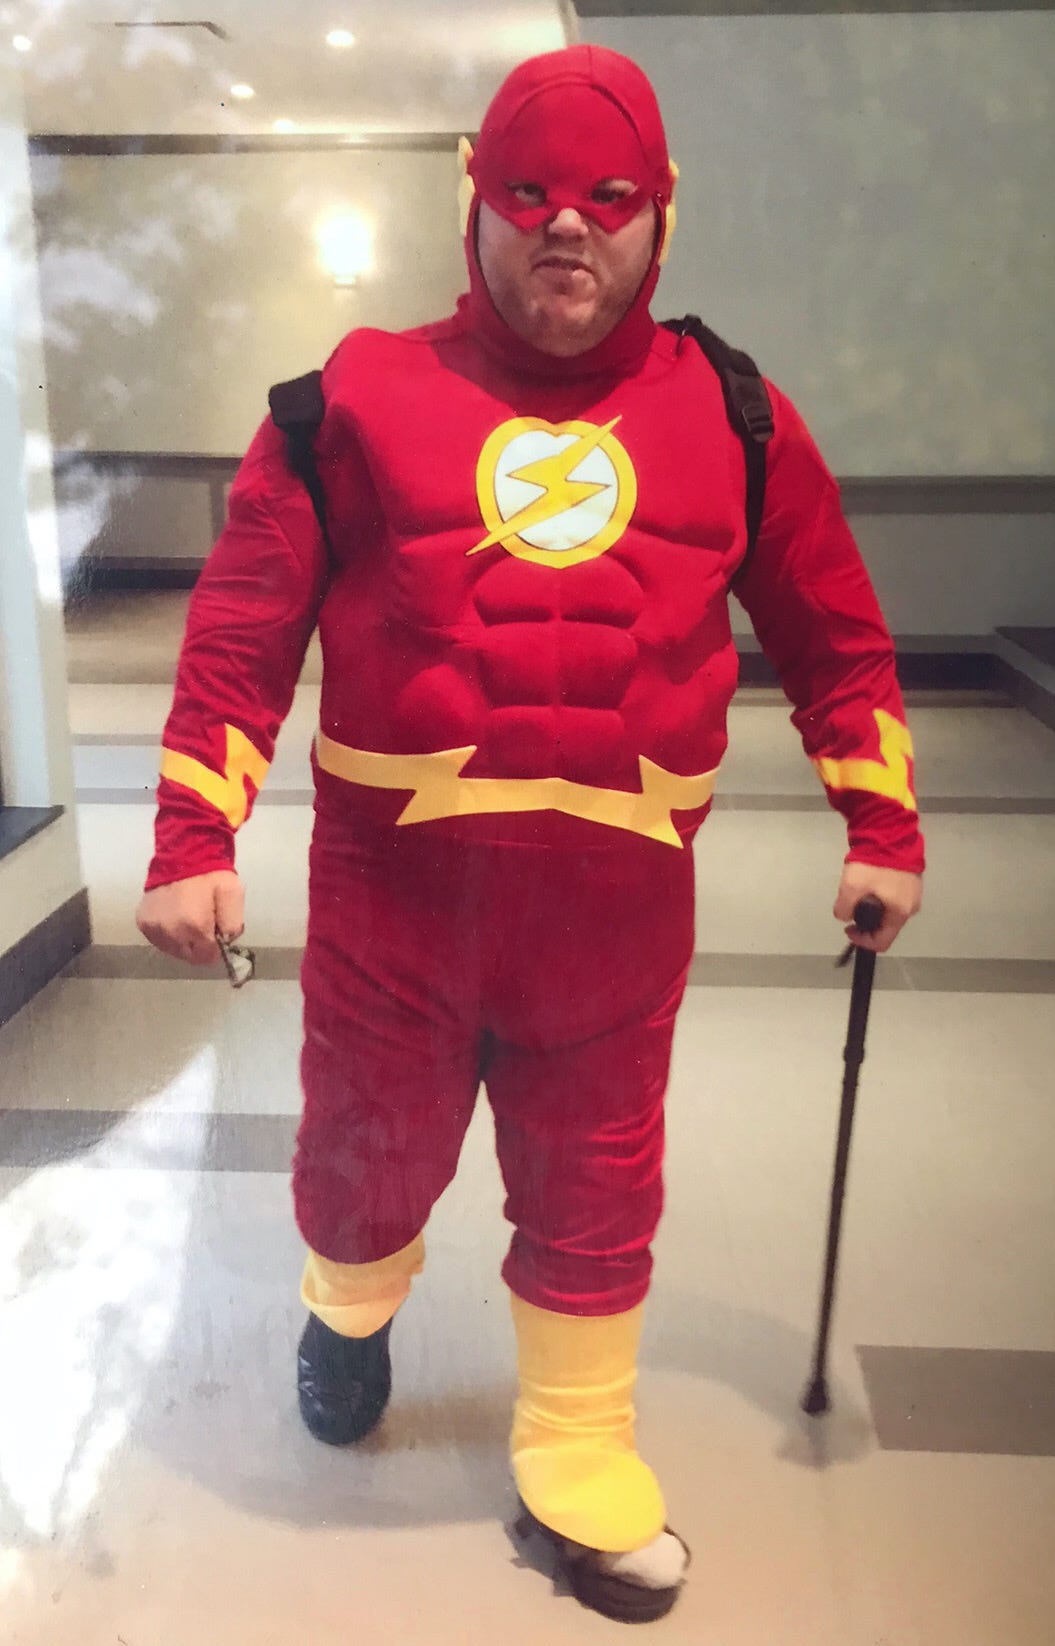 A smiling man wears a red-and-yellow costume to portray the superhero The Flash. The yellow logo on his chest looks like a lightning bolt. He stands in a building lobby, and is using a cane. On his shoulders we can see the straps of the knapsack he is wearing. He has taken off his glasses, which he holds in his right hand.